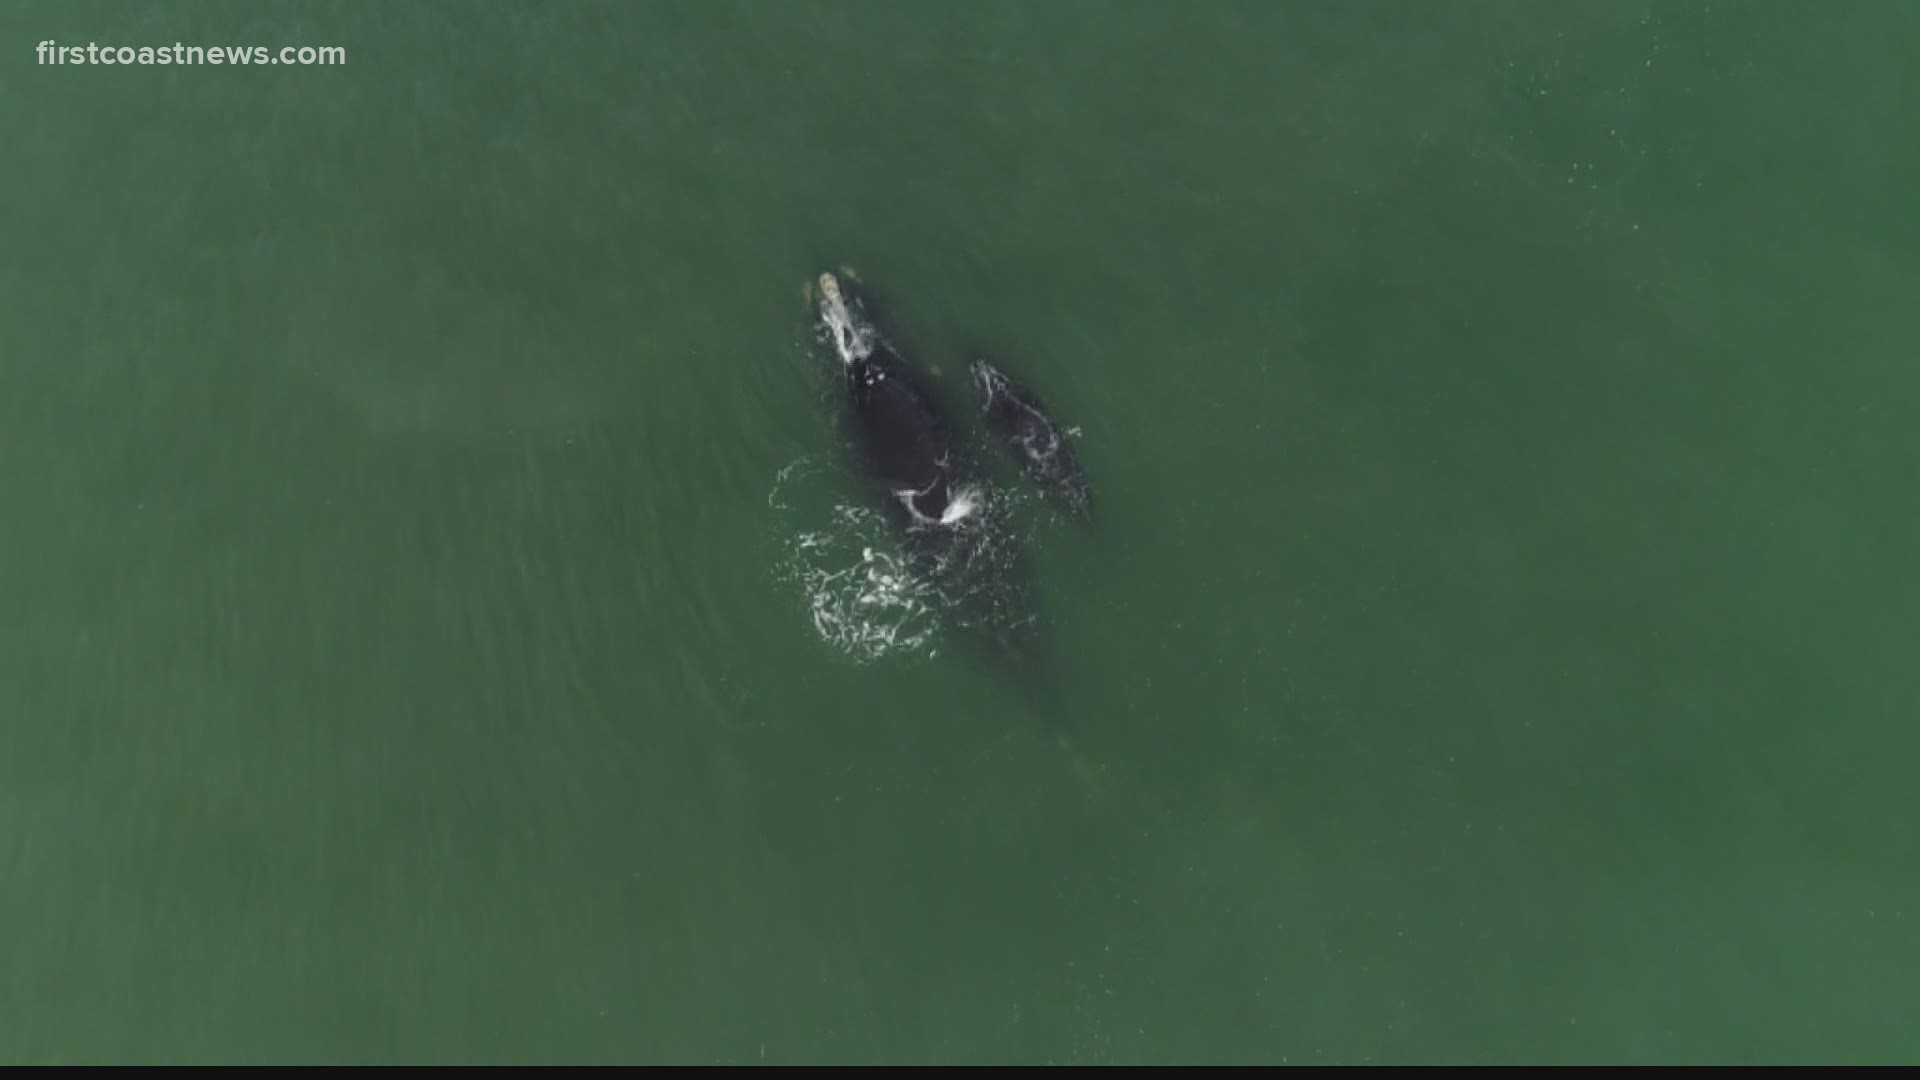 A scientist and drone operator takes video of the paddleboarder by the whales near Matanzas Inlet.